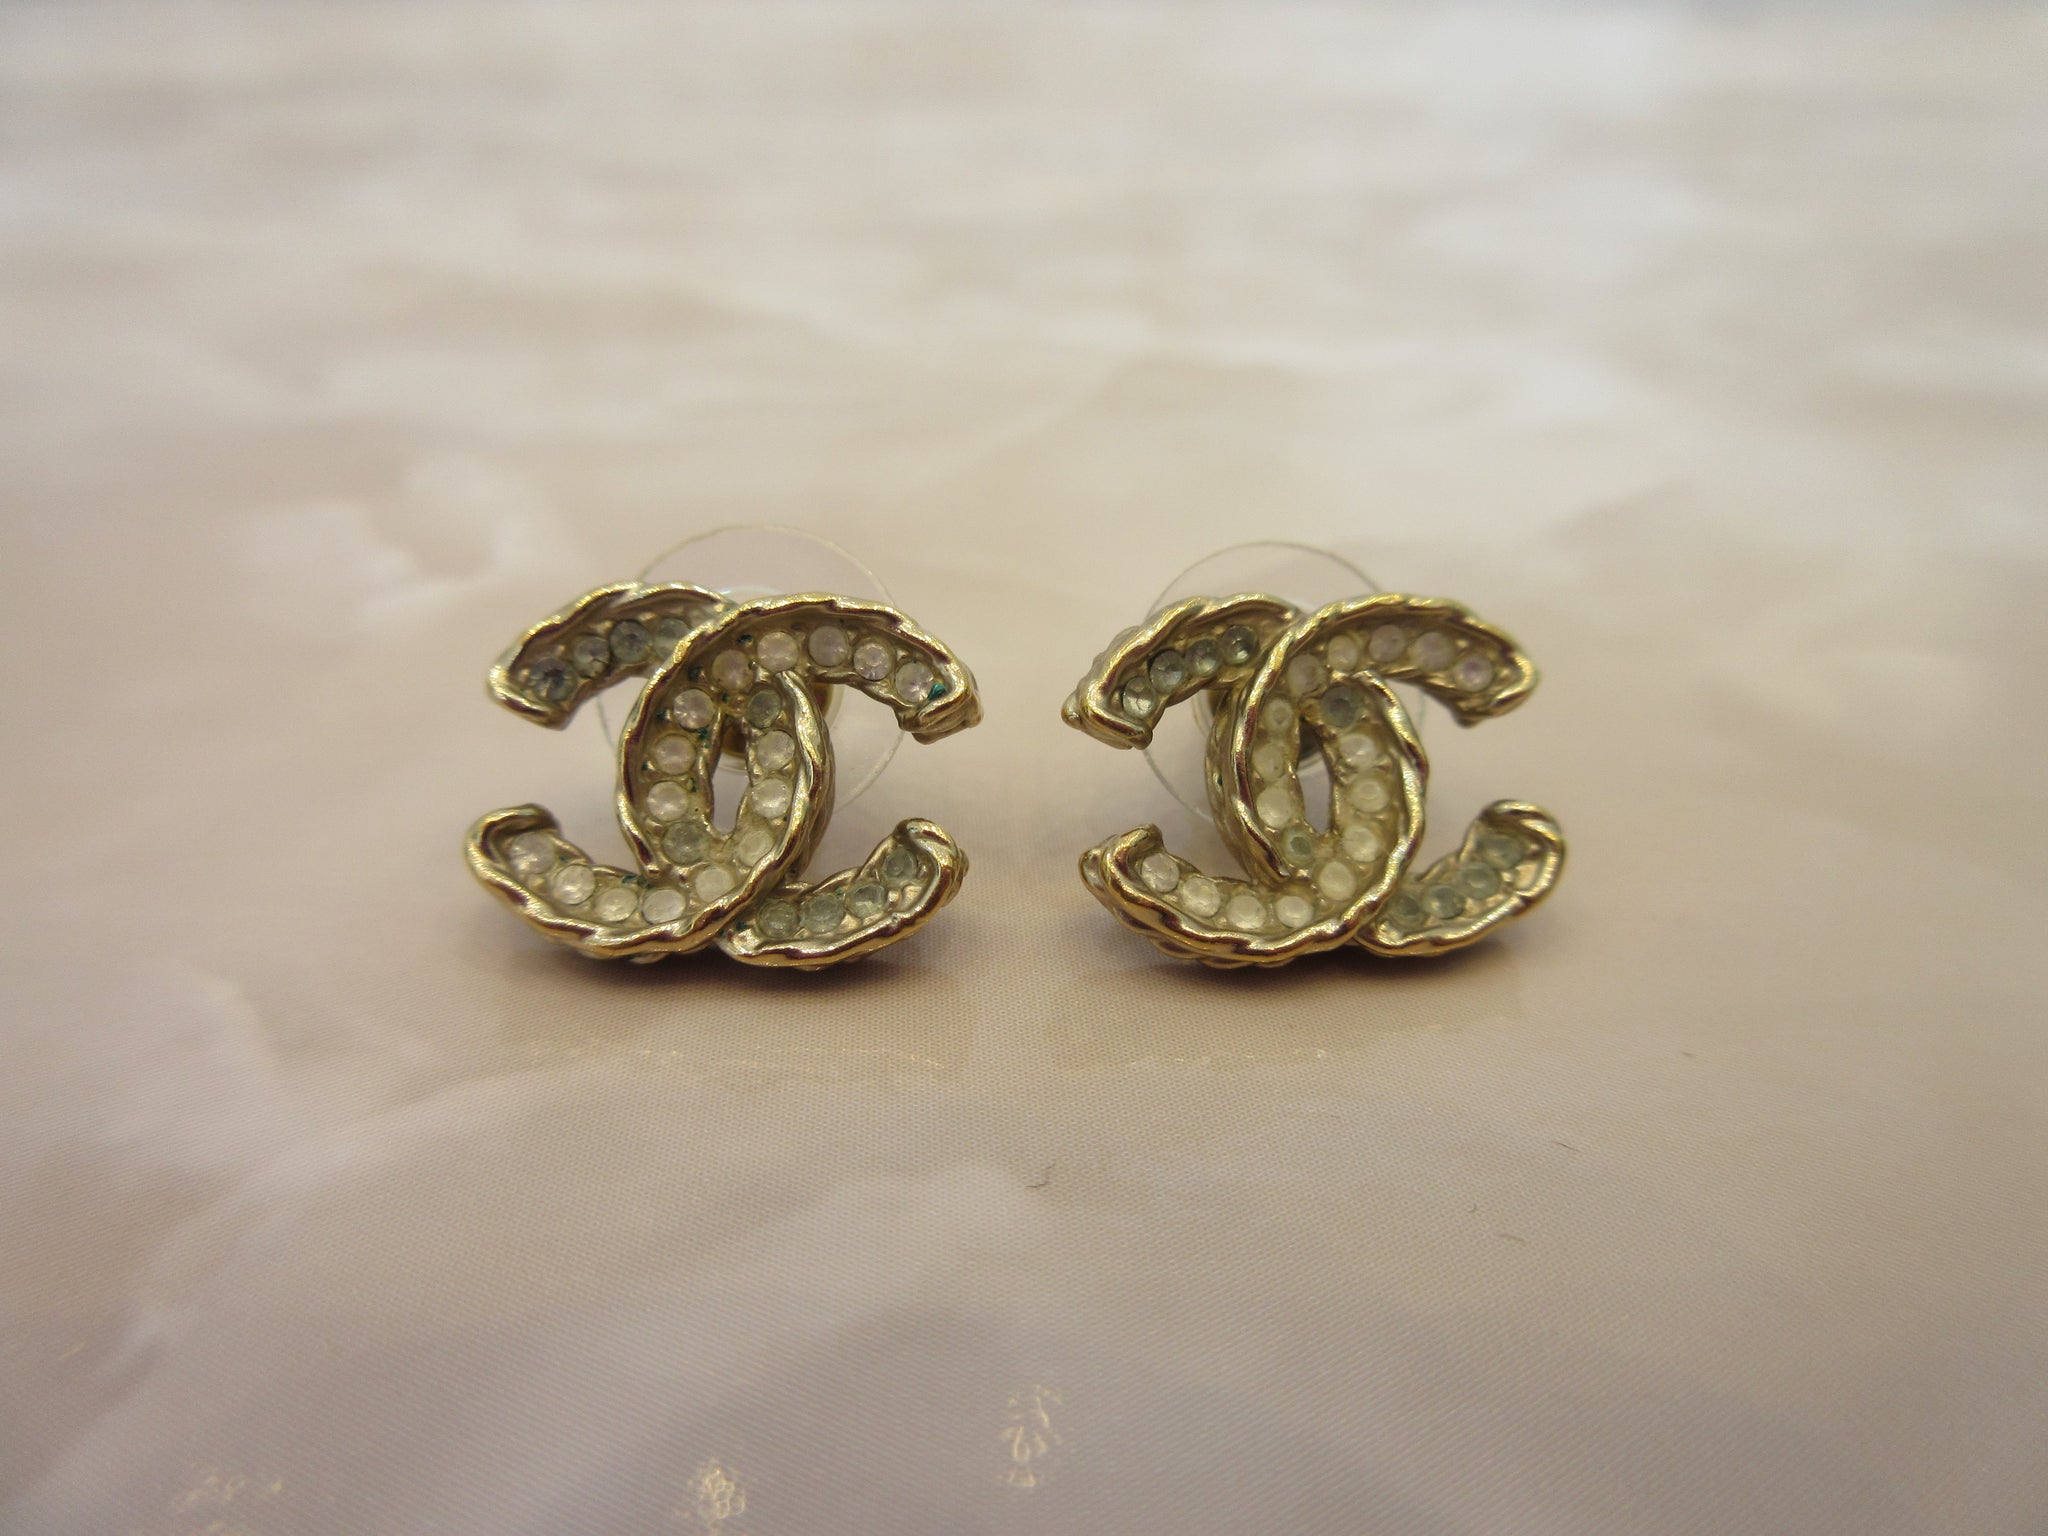 Chanel Classic Gold CC Crystal Piercing Earrings